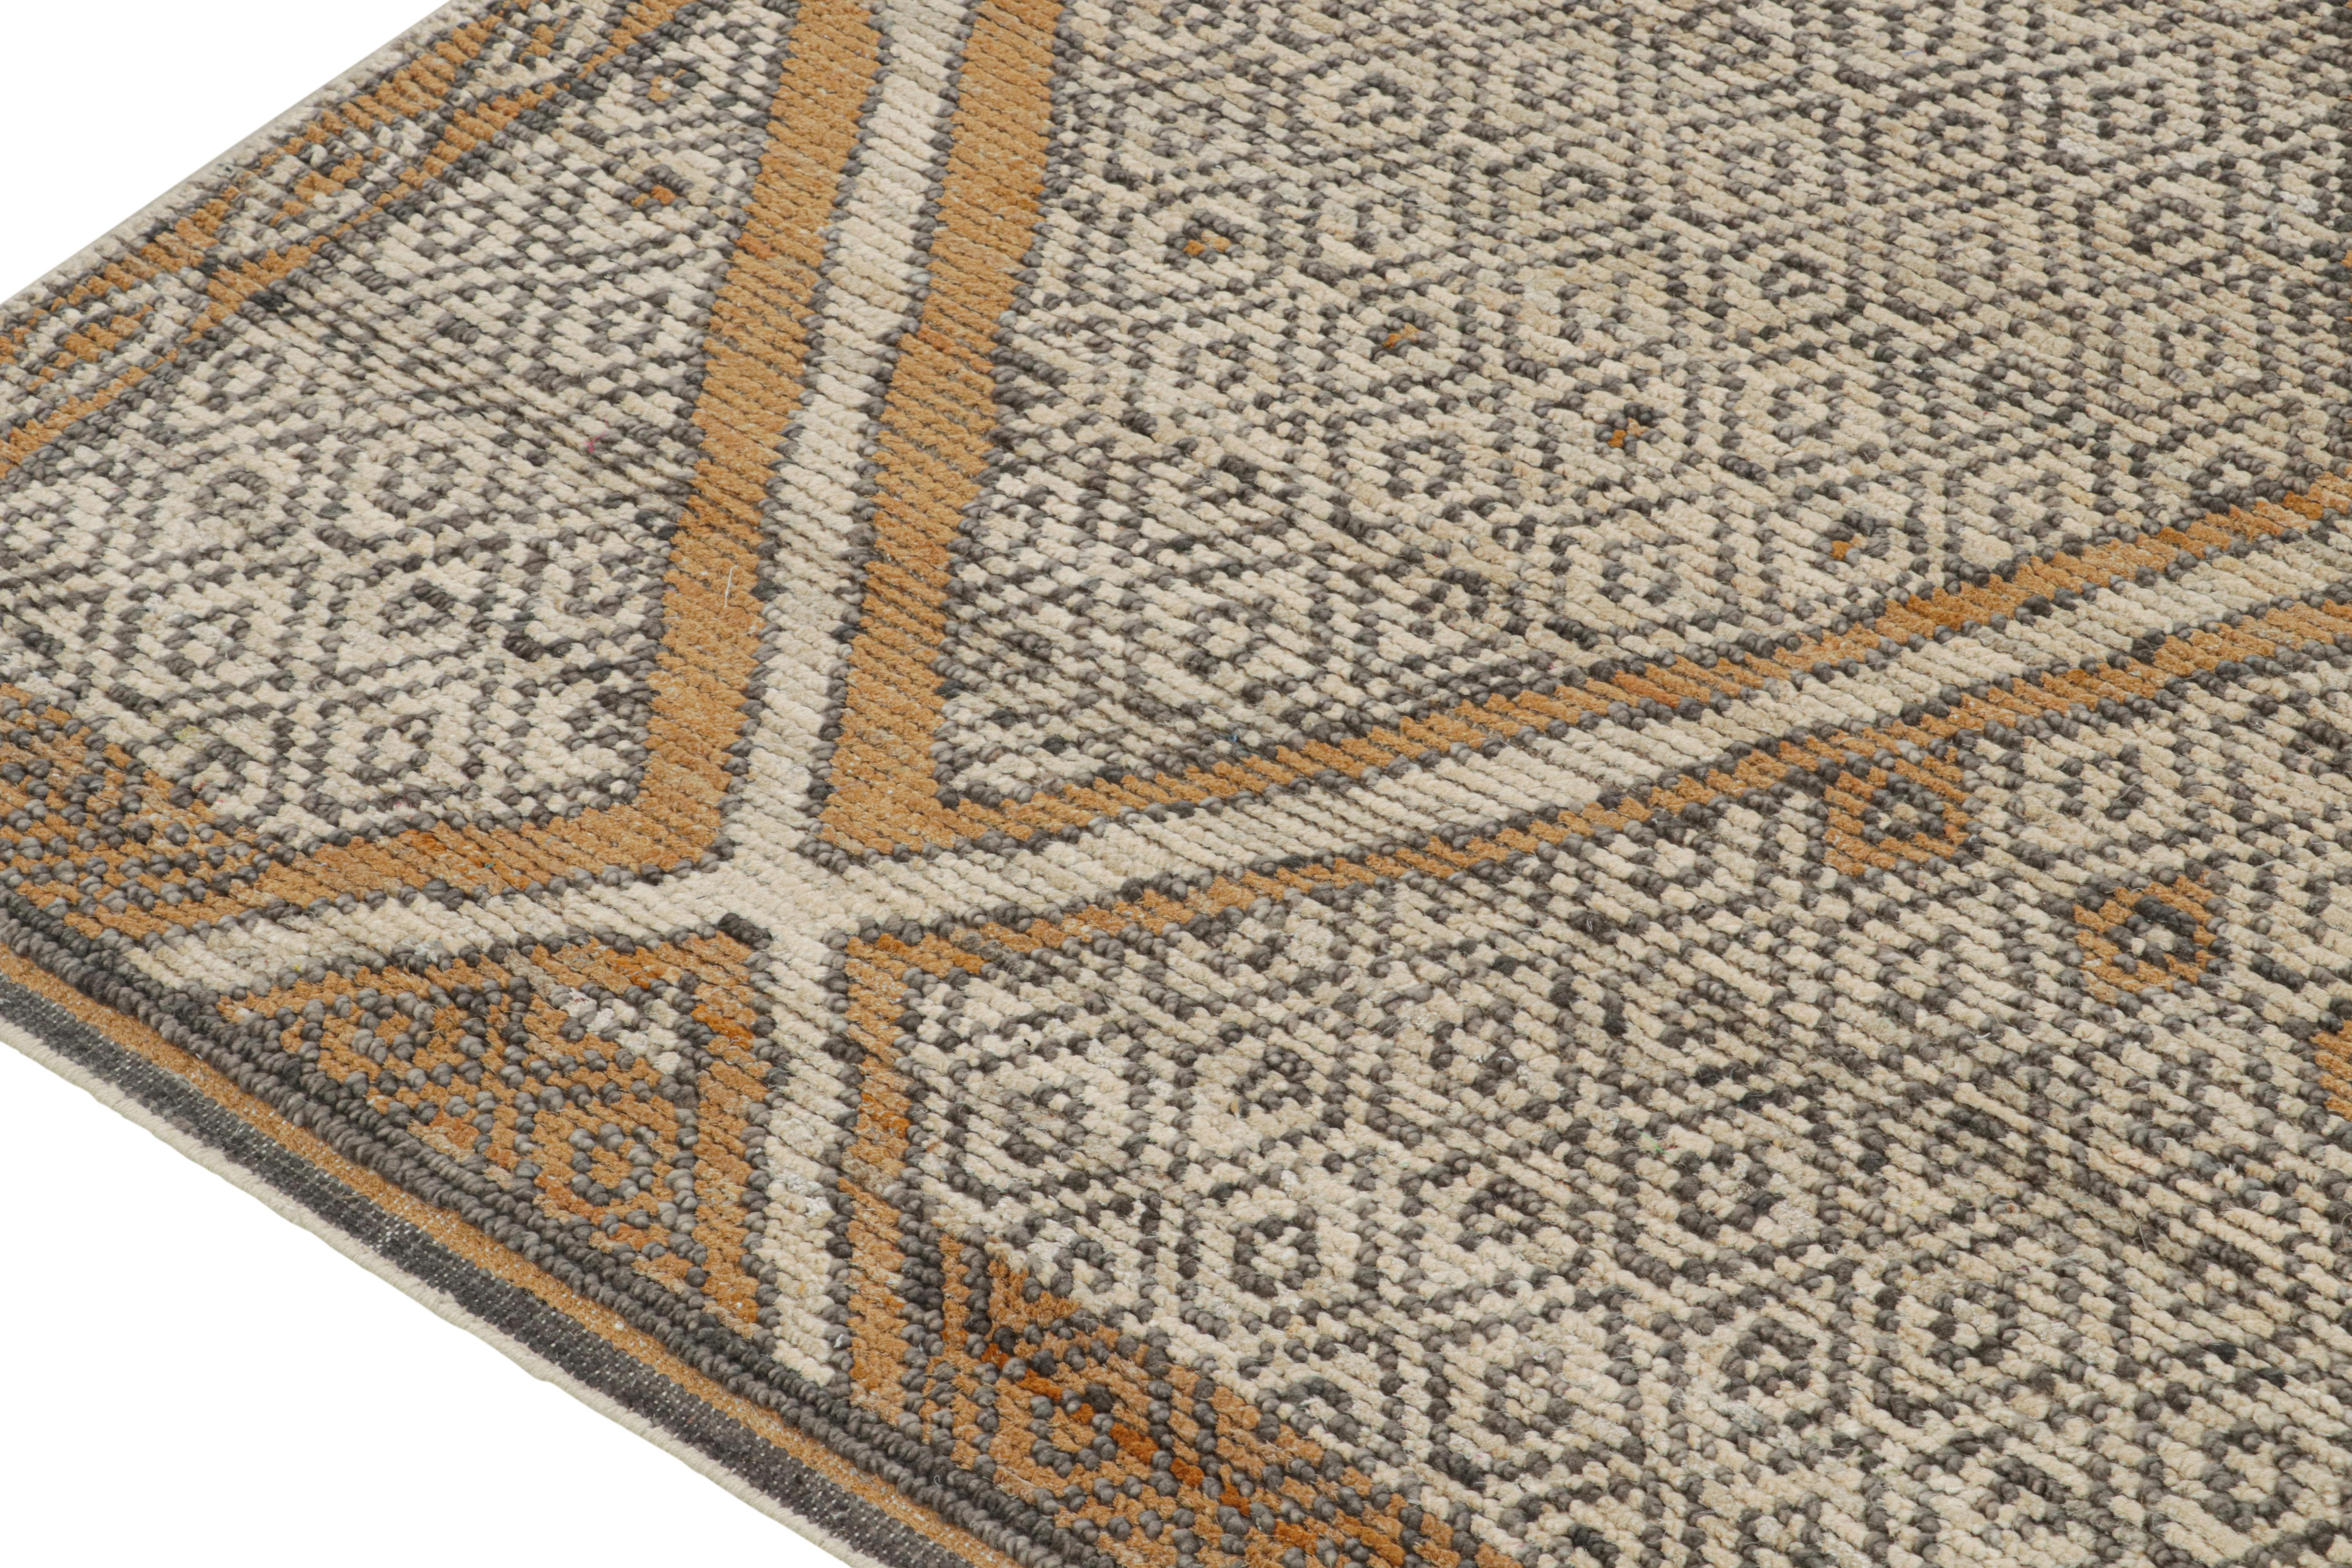 Hand-Knotted Rug & Kilim’s Moroccan Style Rug in Auburn Orange and White Diamond Patterns For Sale